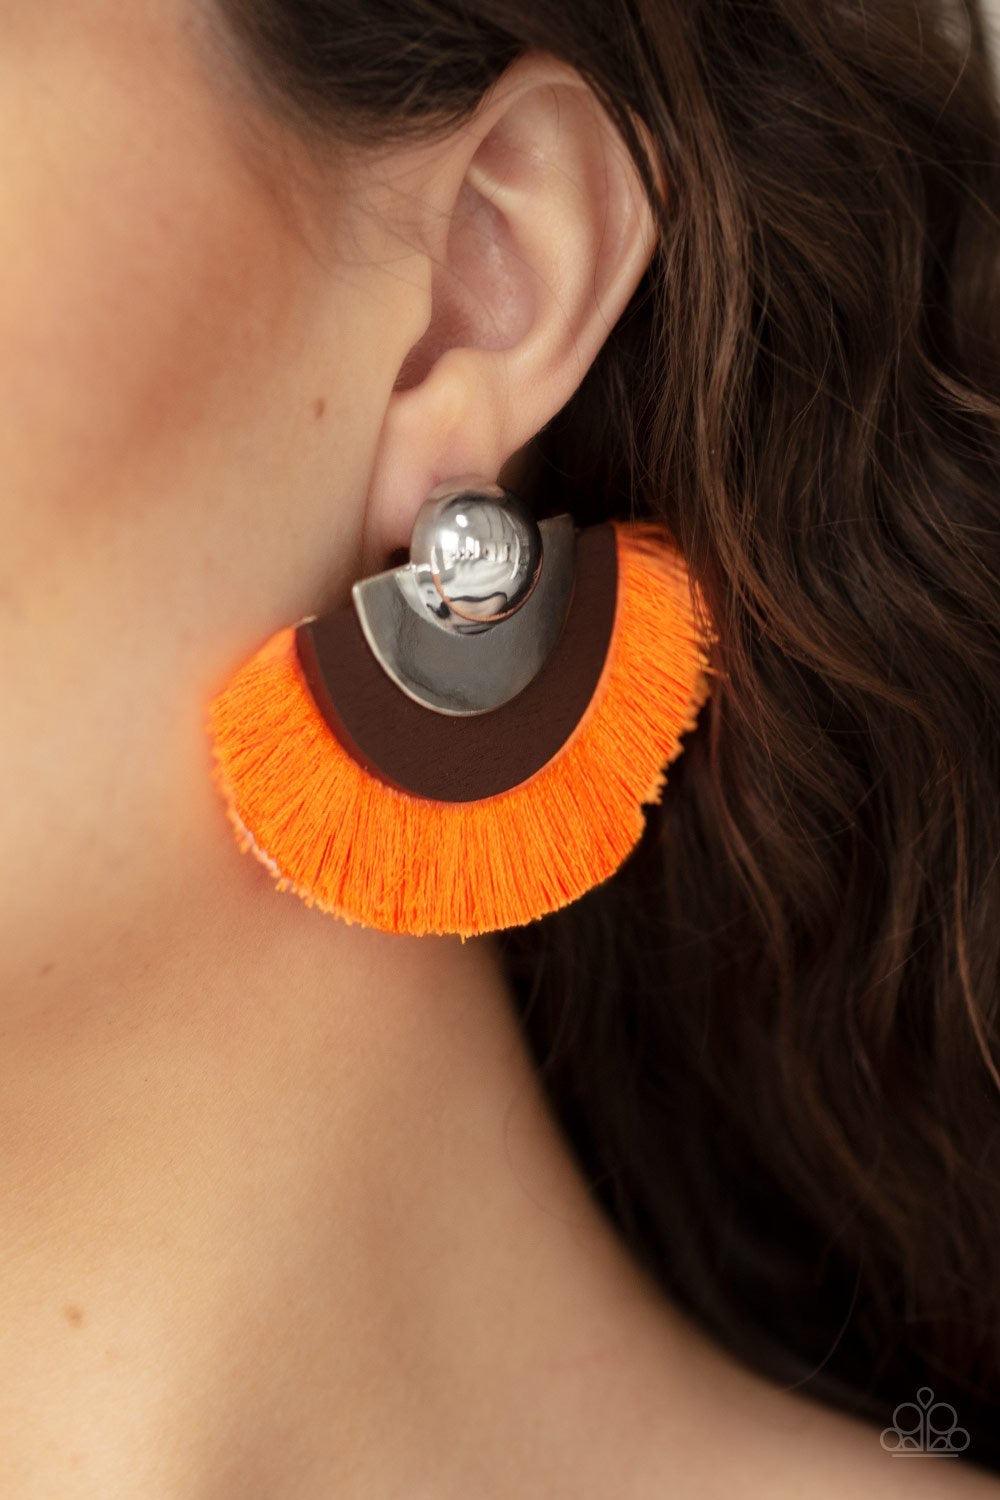 Paparazzi Accessories Fan the FLAMBOYANCE - Orange Neon orange thread fans from the bottom of a retro silver and wooden frame, creating a vivacious fringe. Earring attaches to a standard post fitting. Sold as one pair of post earrings. Jewelry